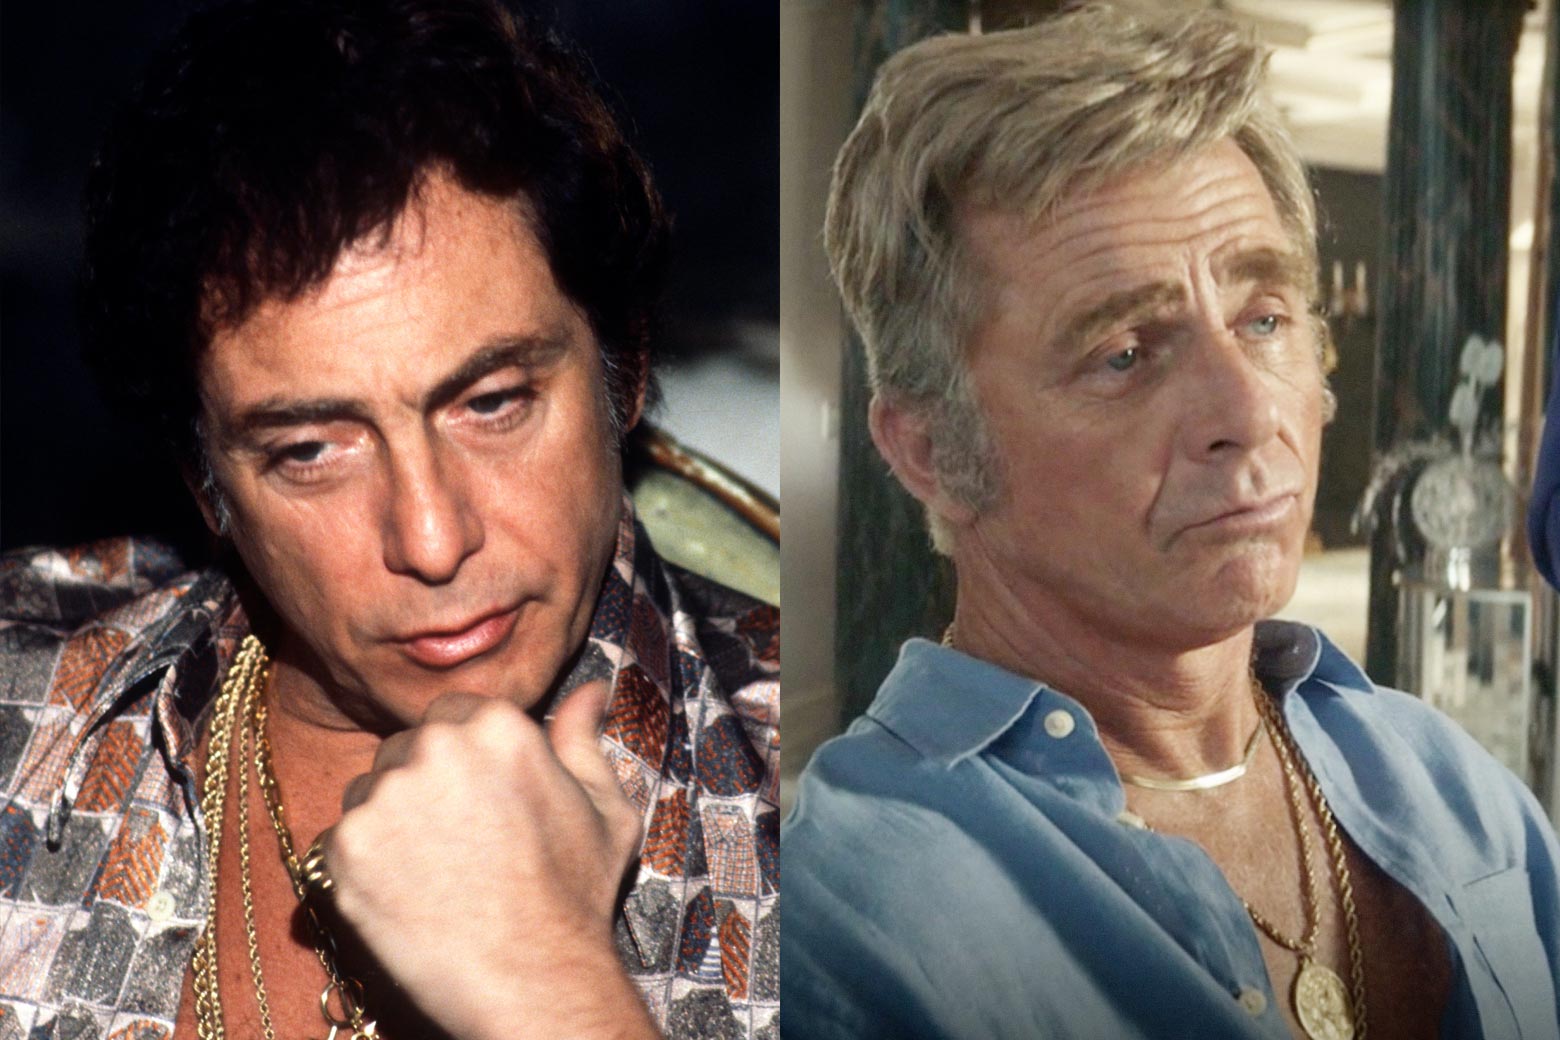 Diptych of the real Guccione and Caulfield as Guccione, both wearing necklaces and shirts unbuttoned to the middle of the chest